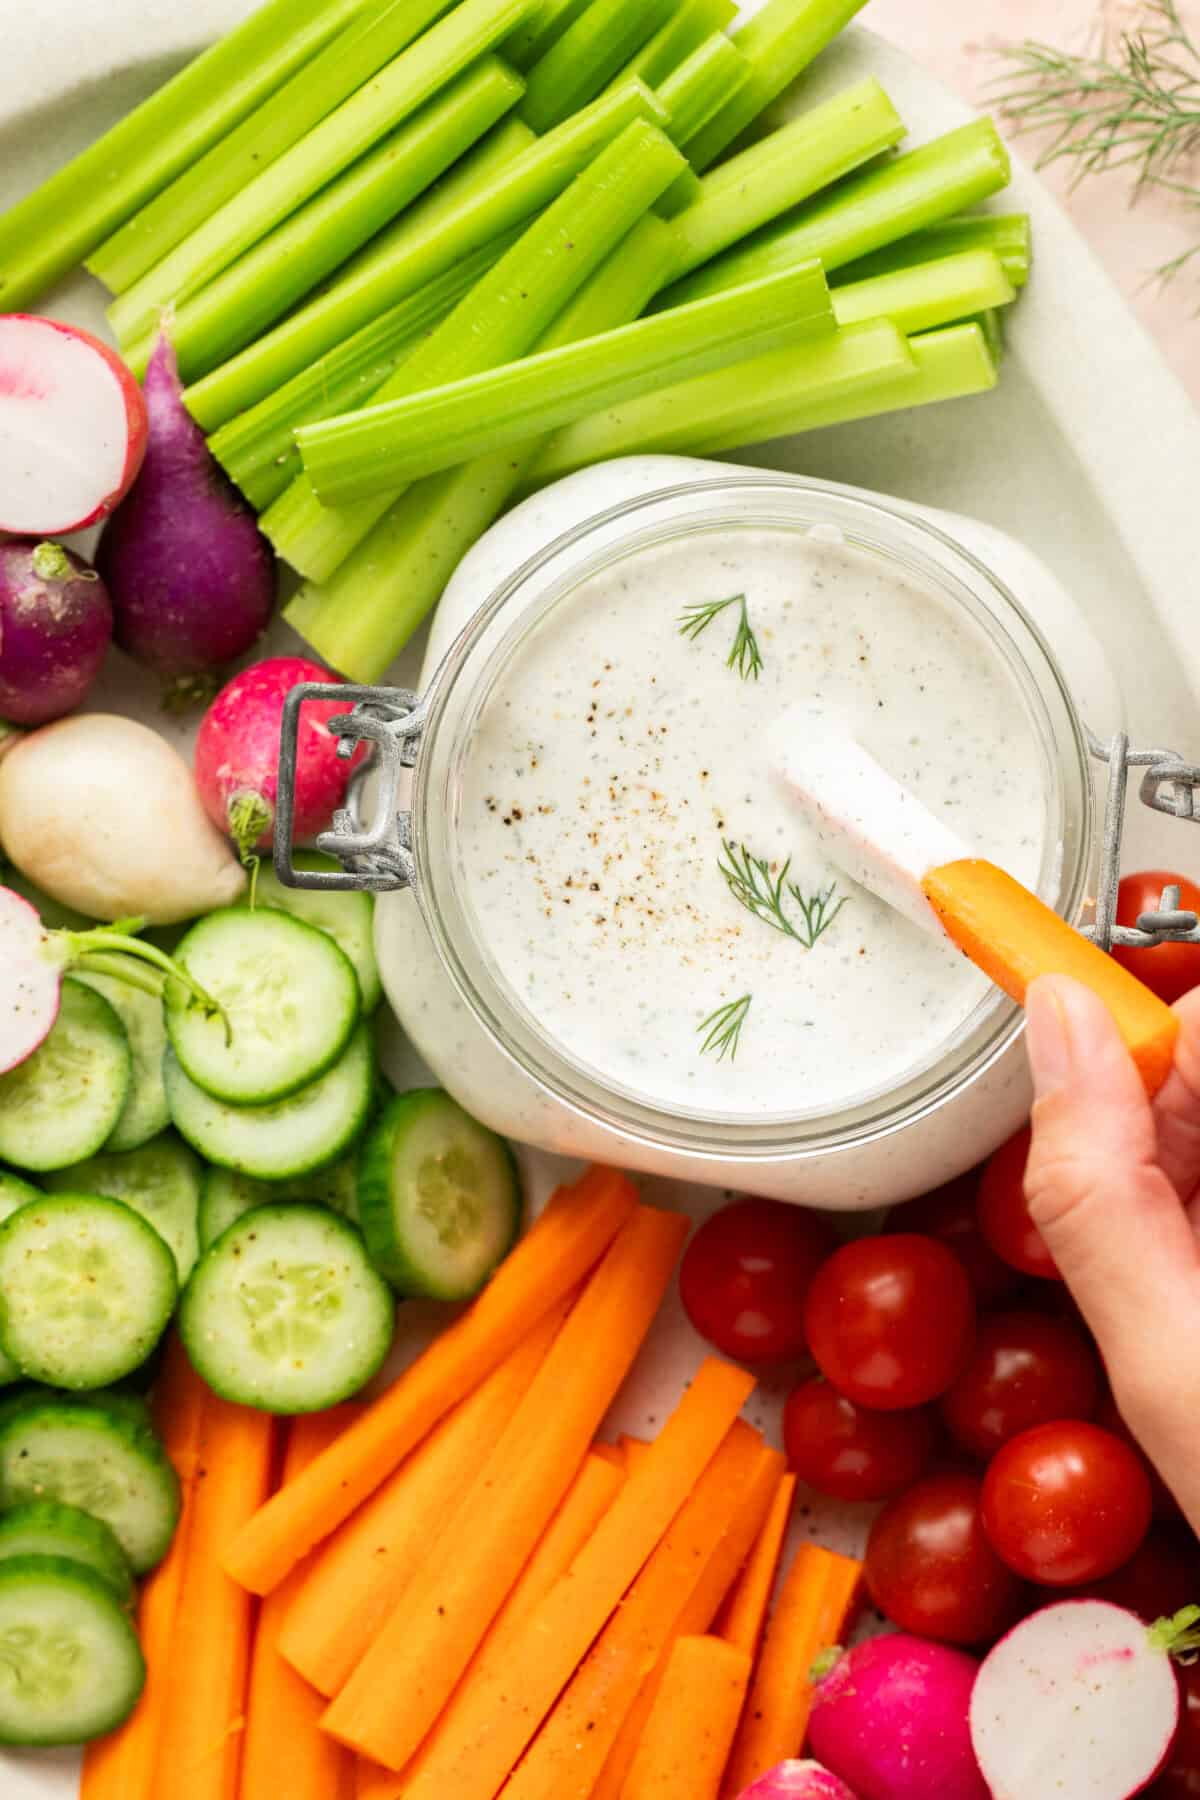 Carrot dipping into ranch dip with other veggies around on a platter. 